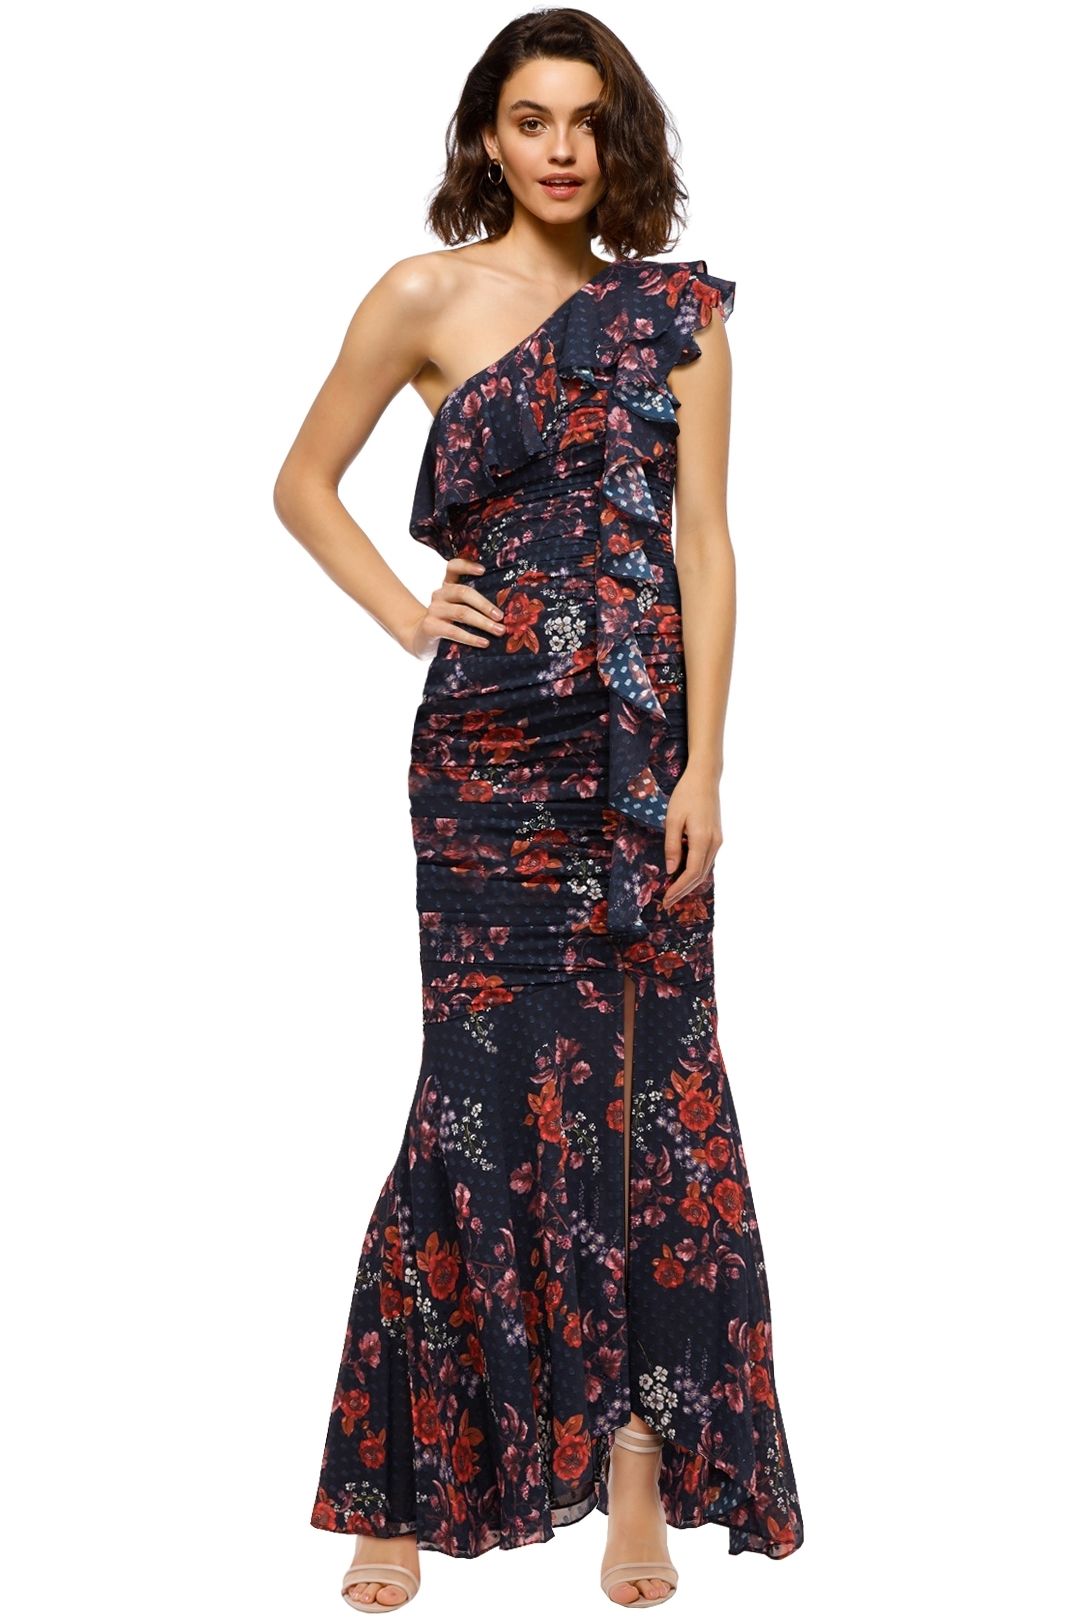 Keepsake The Label - Need You Now Gown - Navy Floral - Front